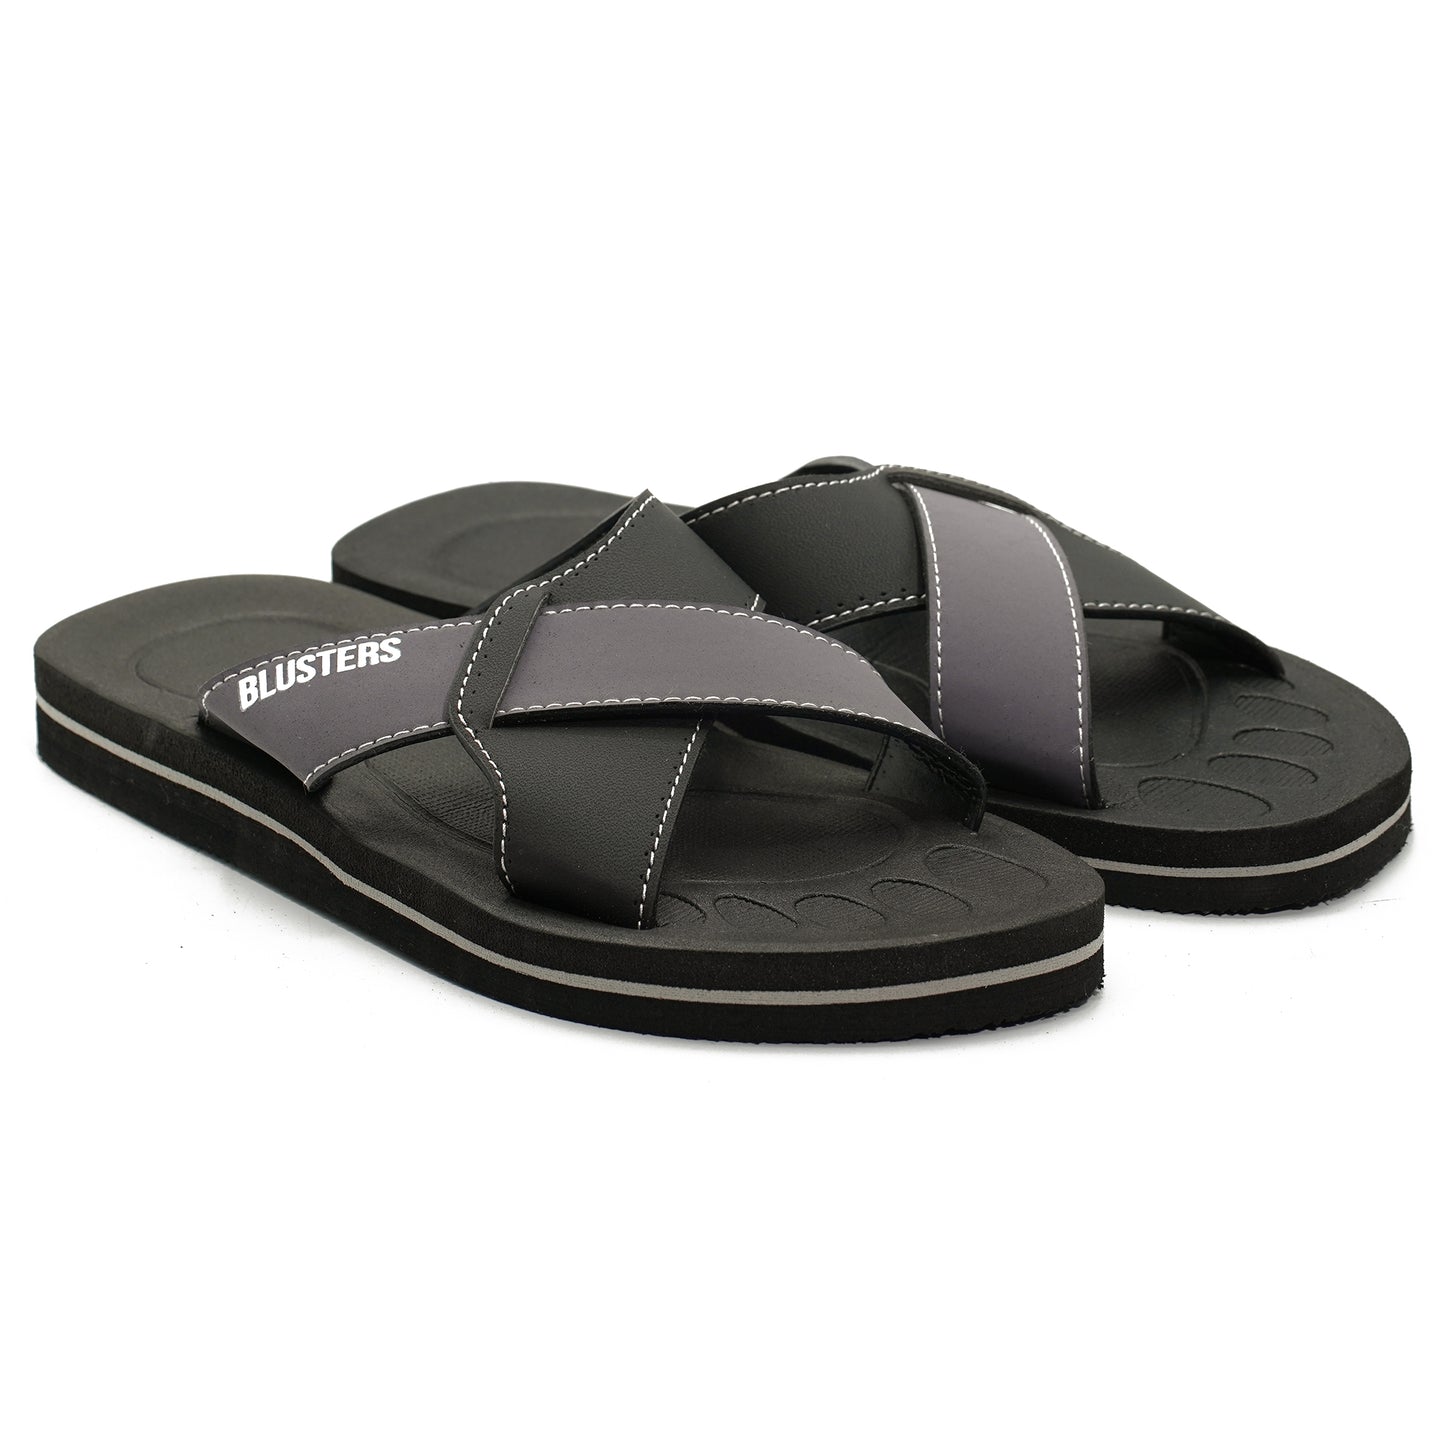 Blusters Multi Strap Slippers